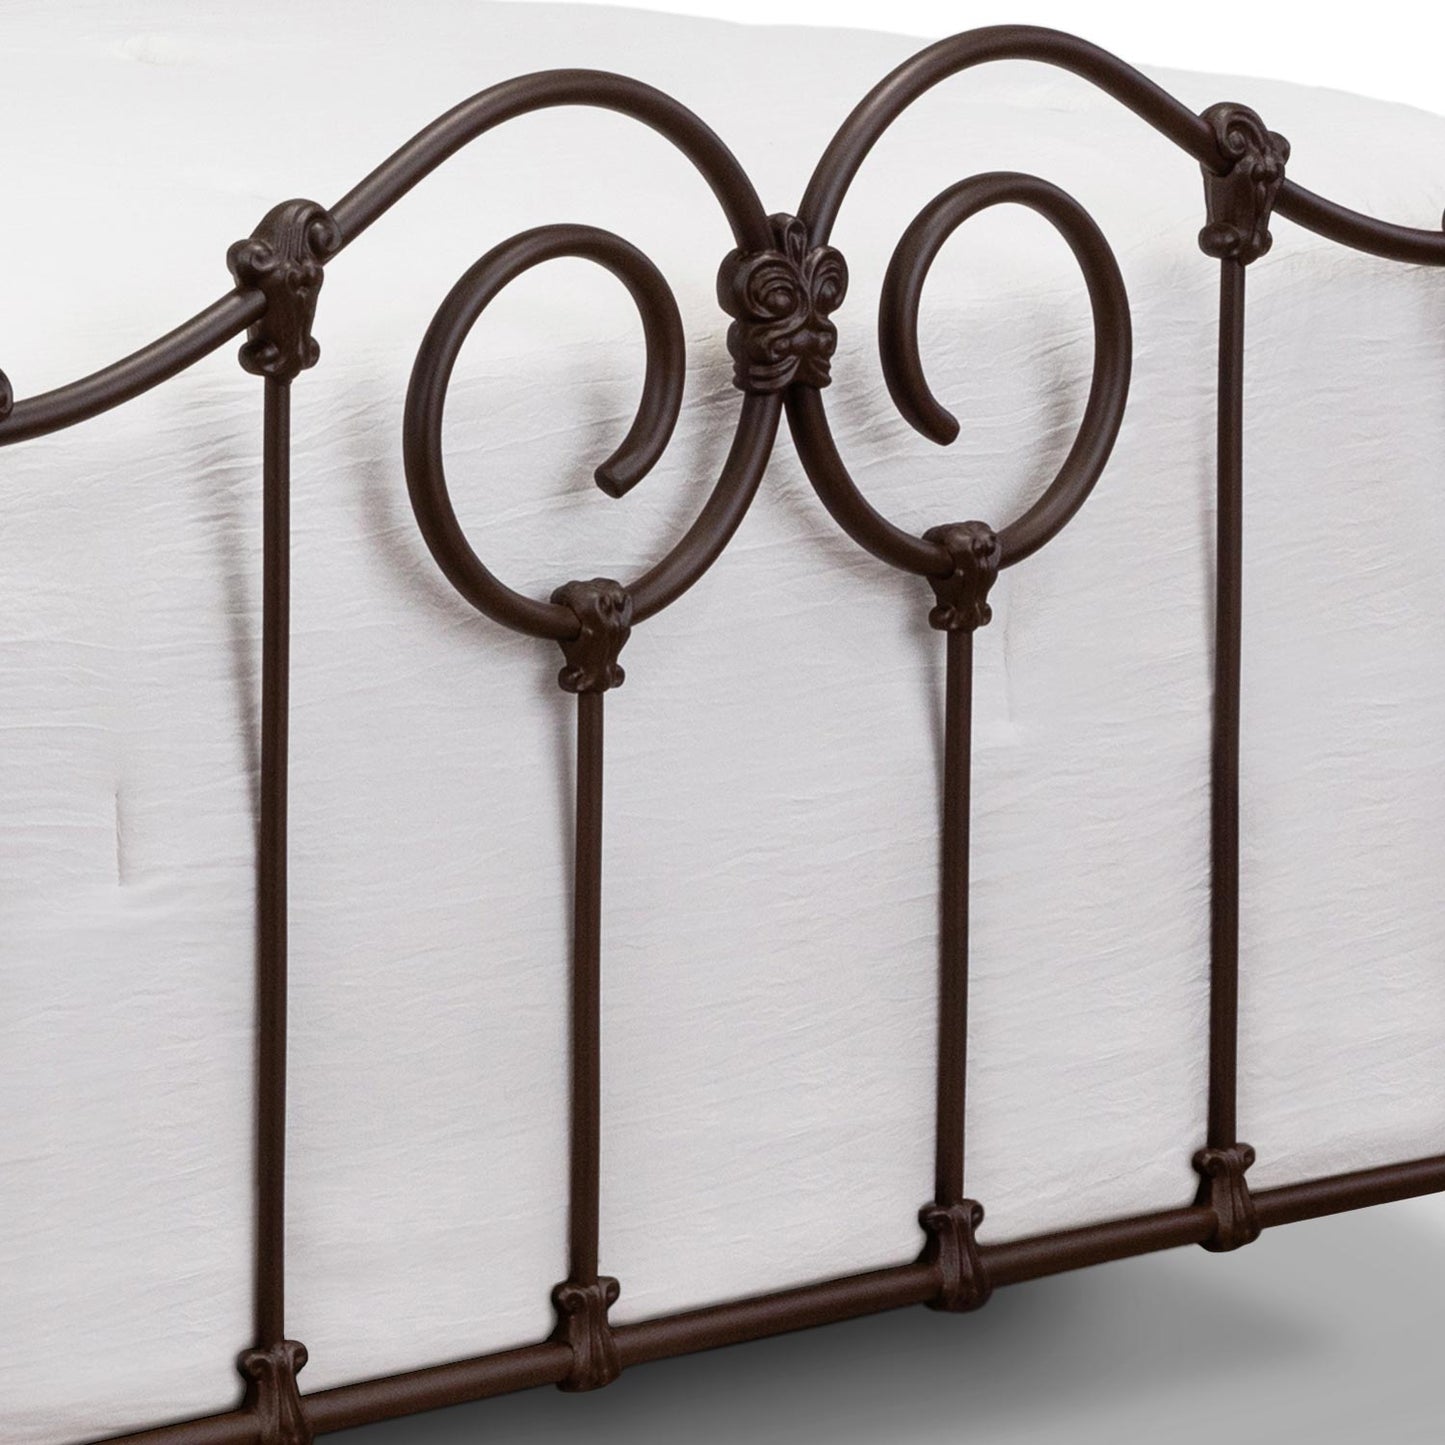 Olympia Iron Bed 7165 Wesley Allen Queen CBMPF Natural Rust Finish Matriae